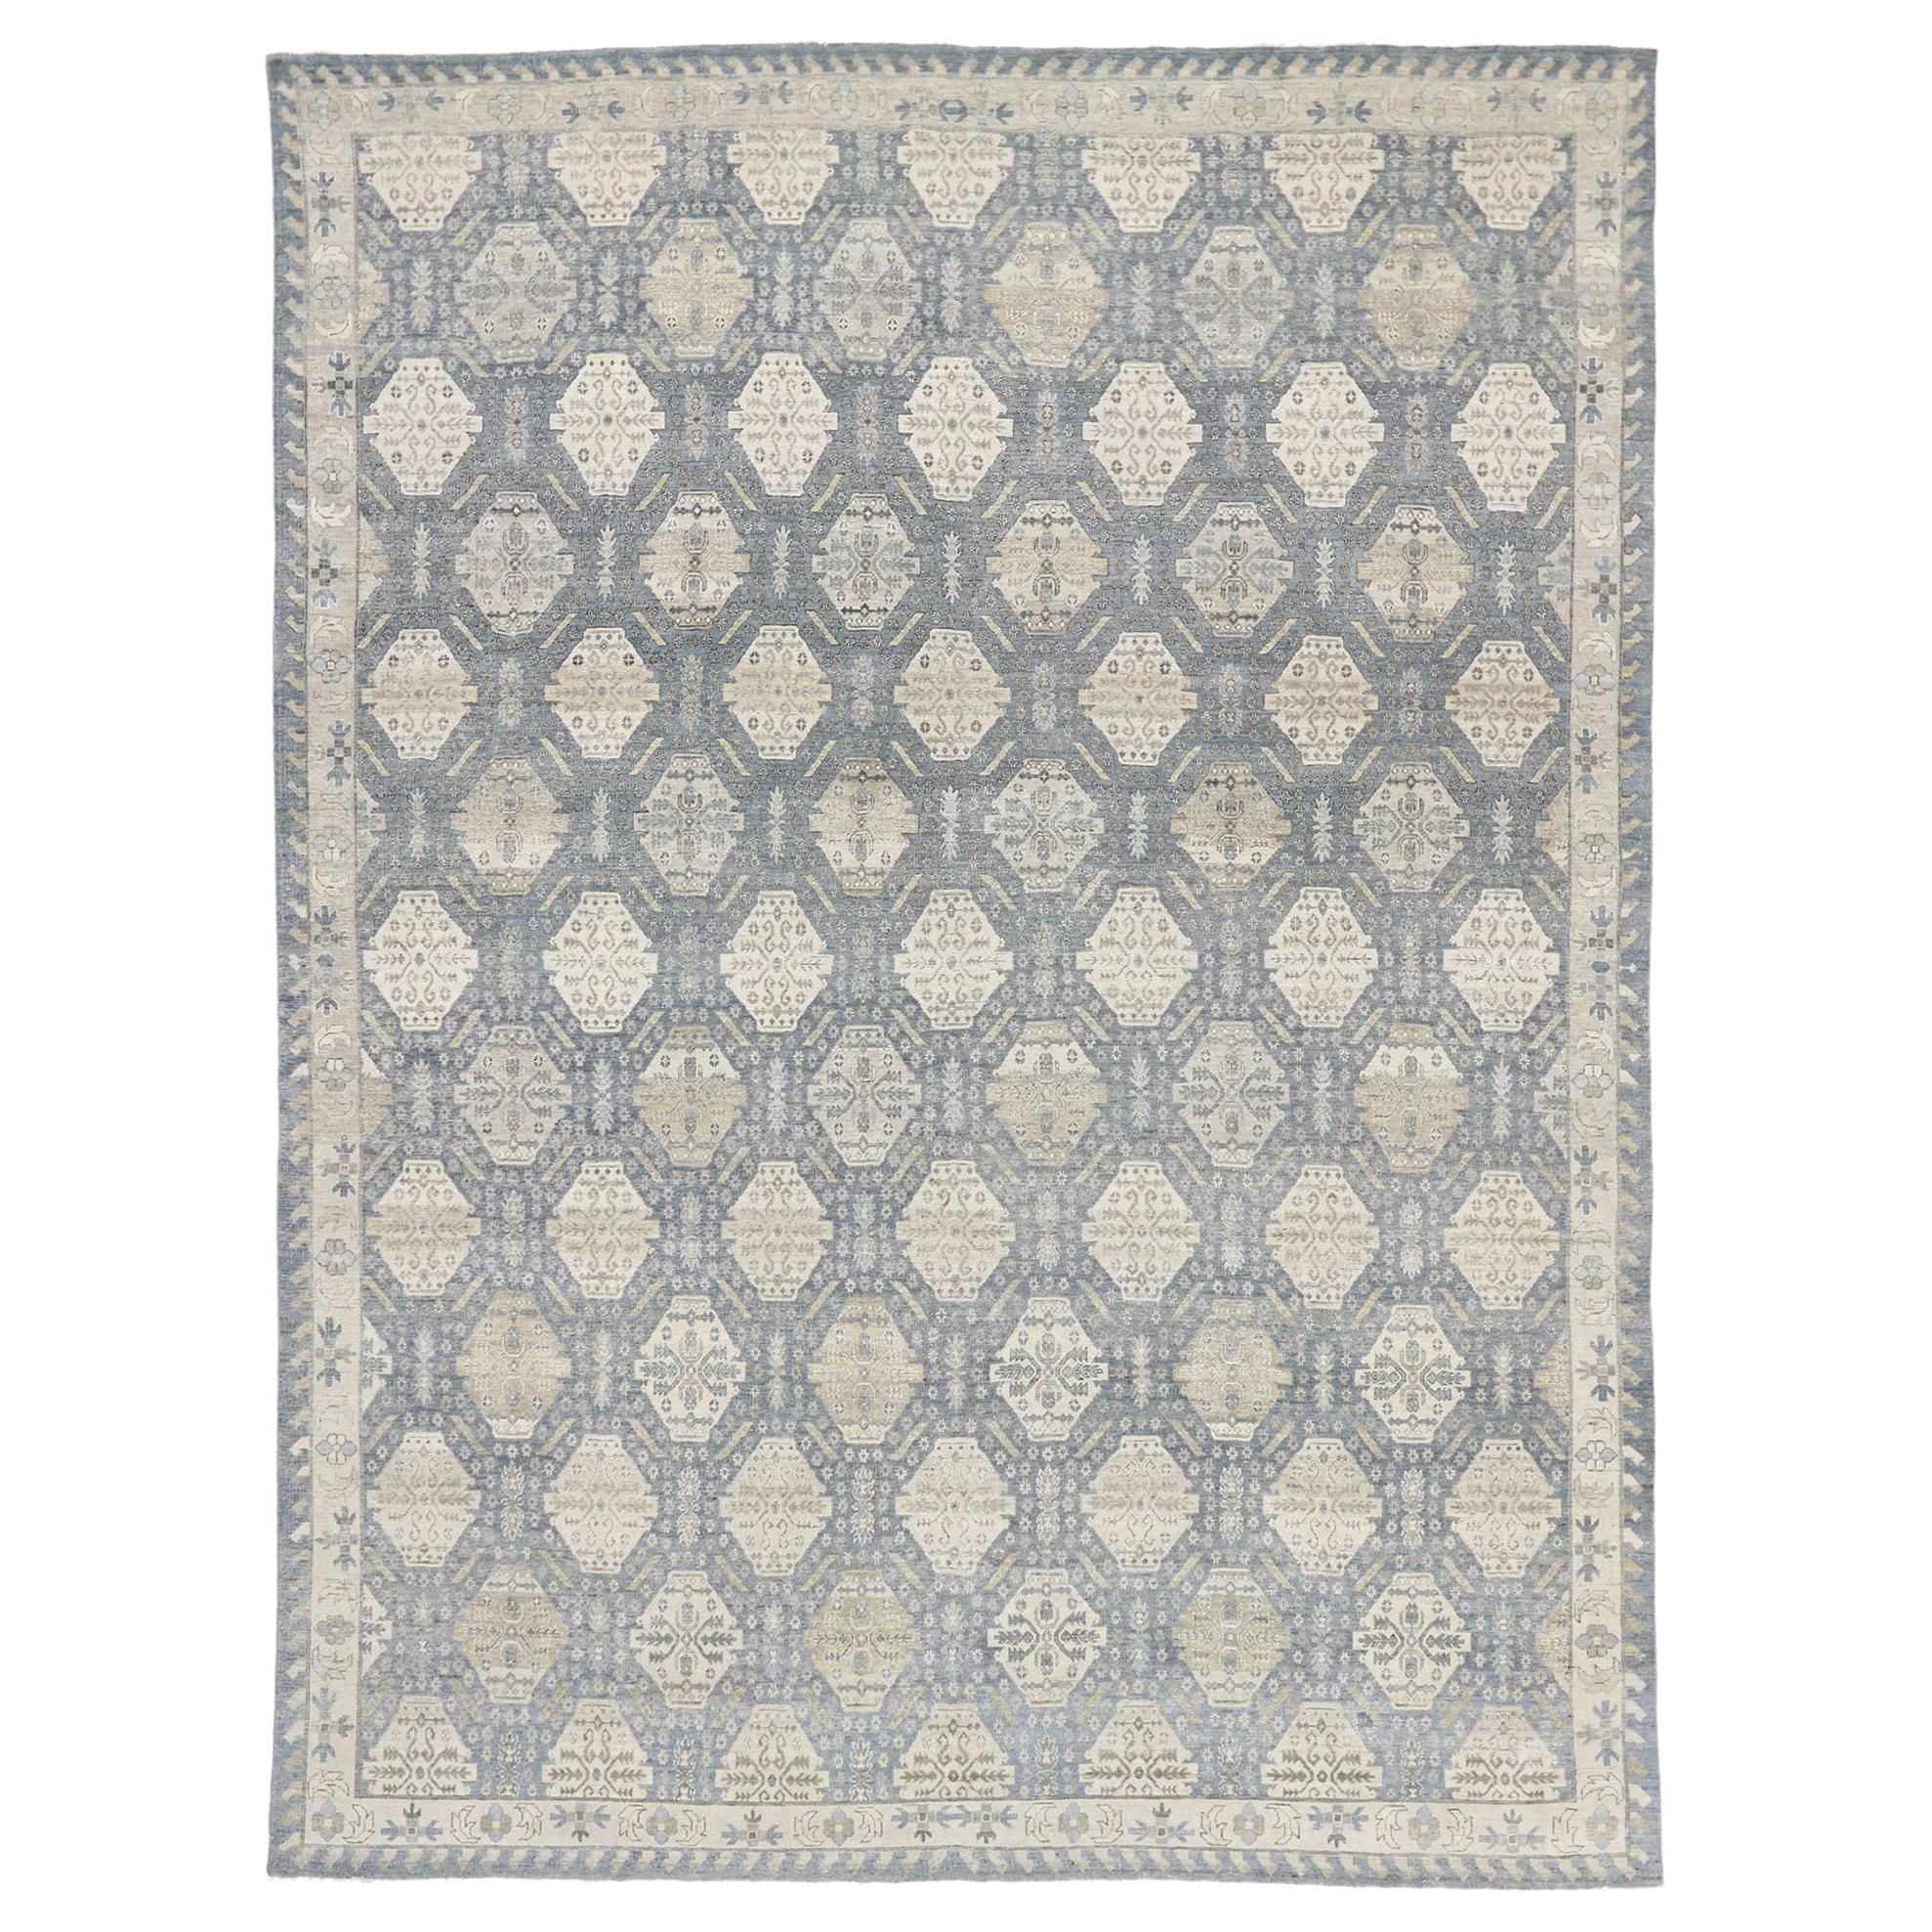 New Contemporary Oushak Style Rug with Rustic Coastal Style